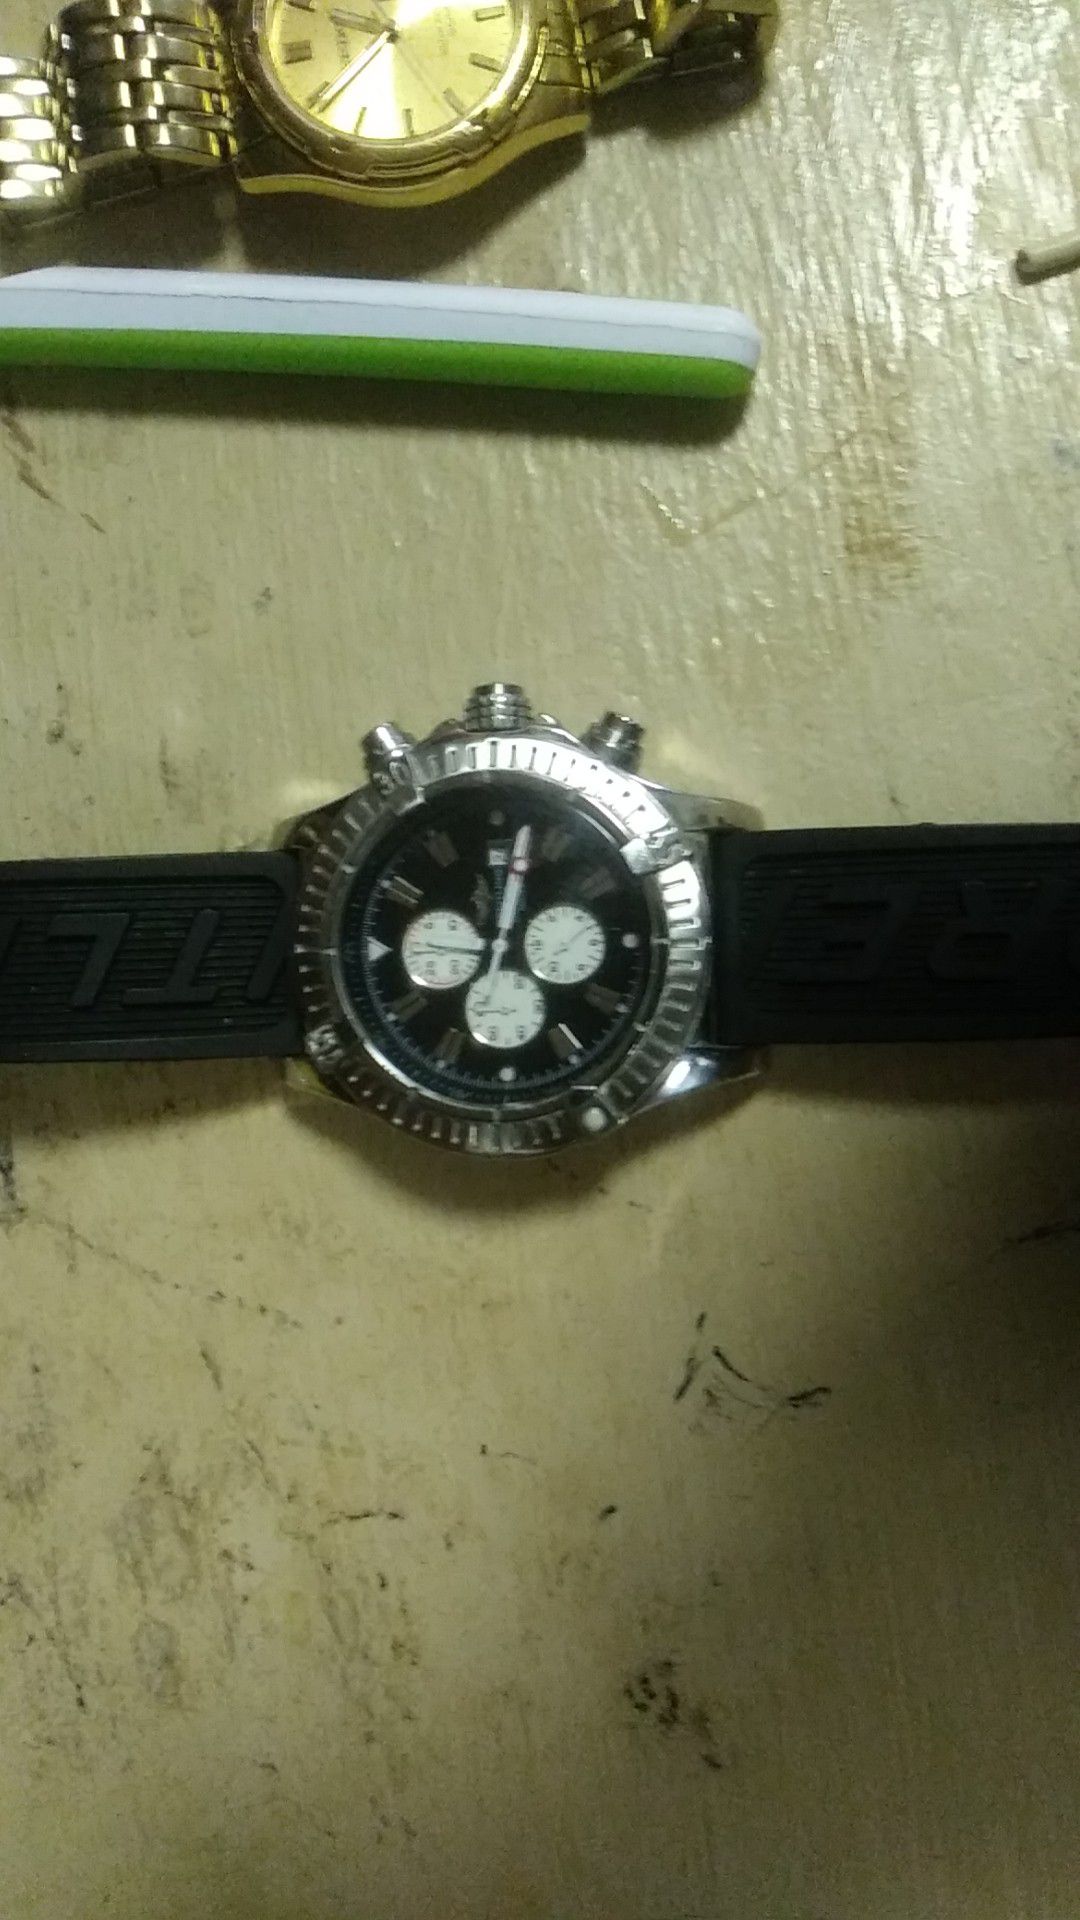 Breitlng watch diving